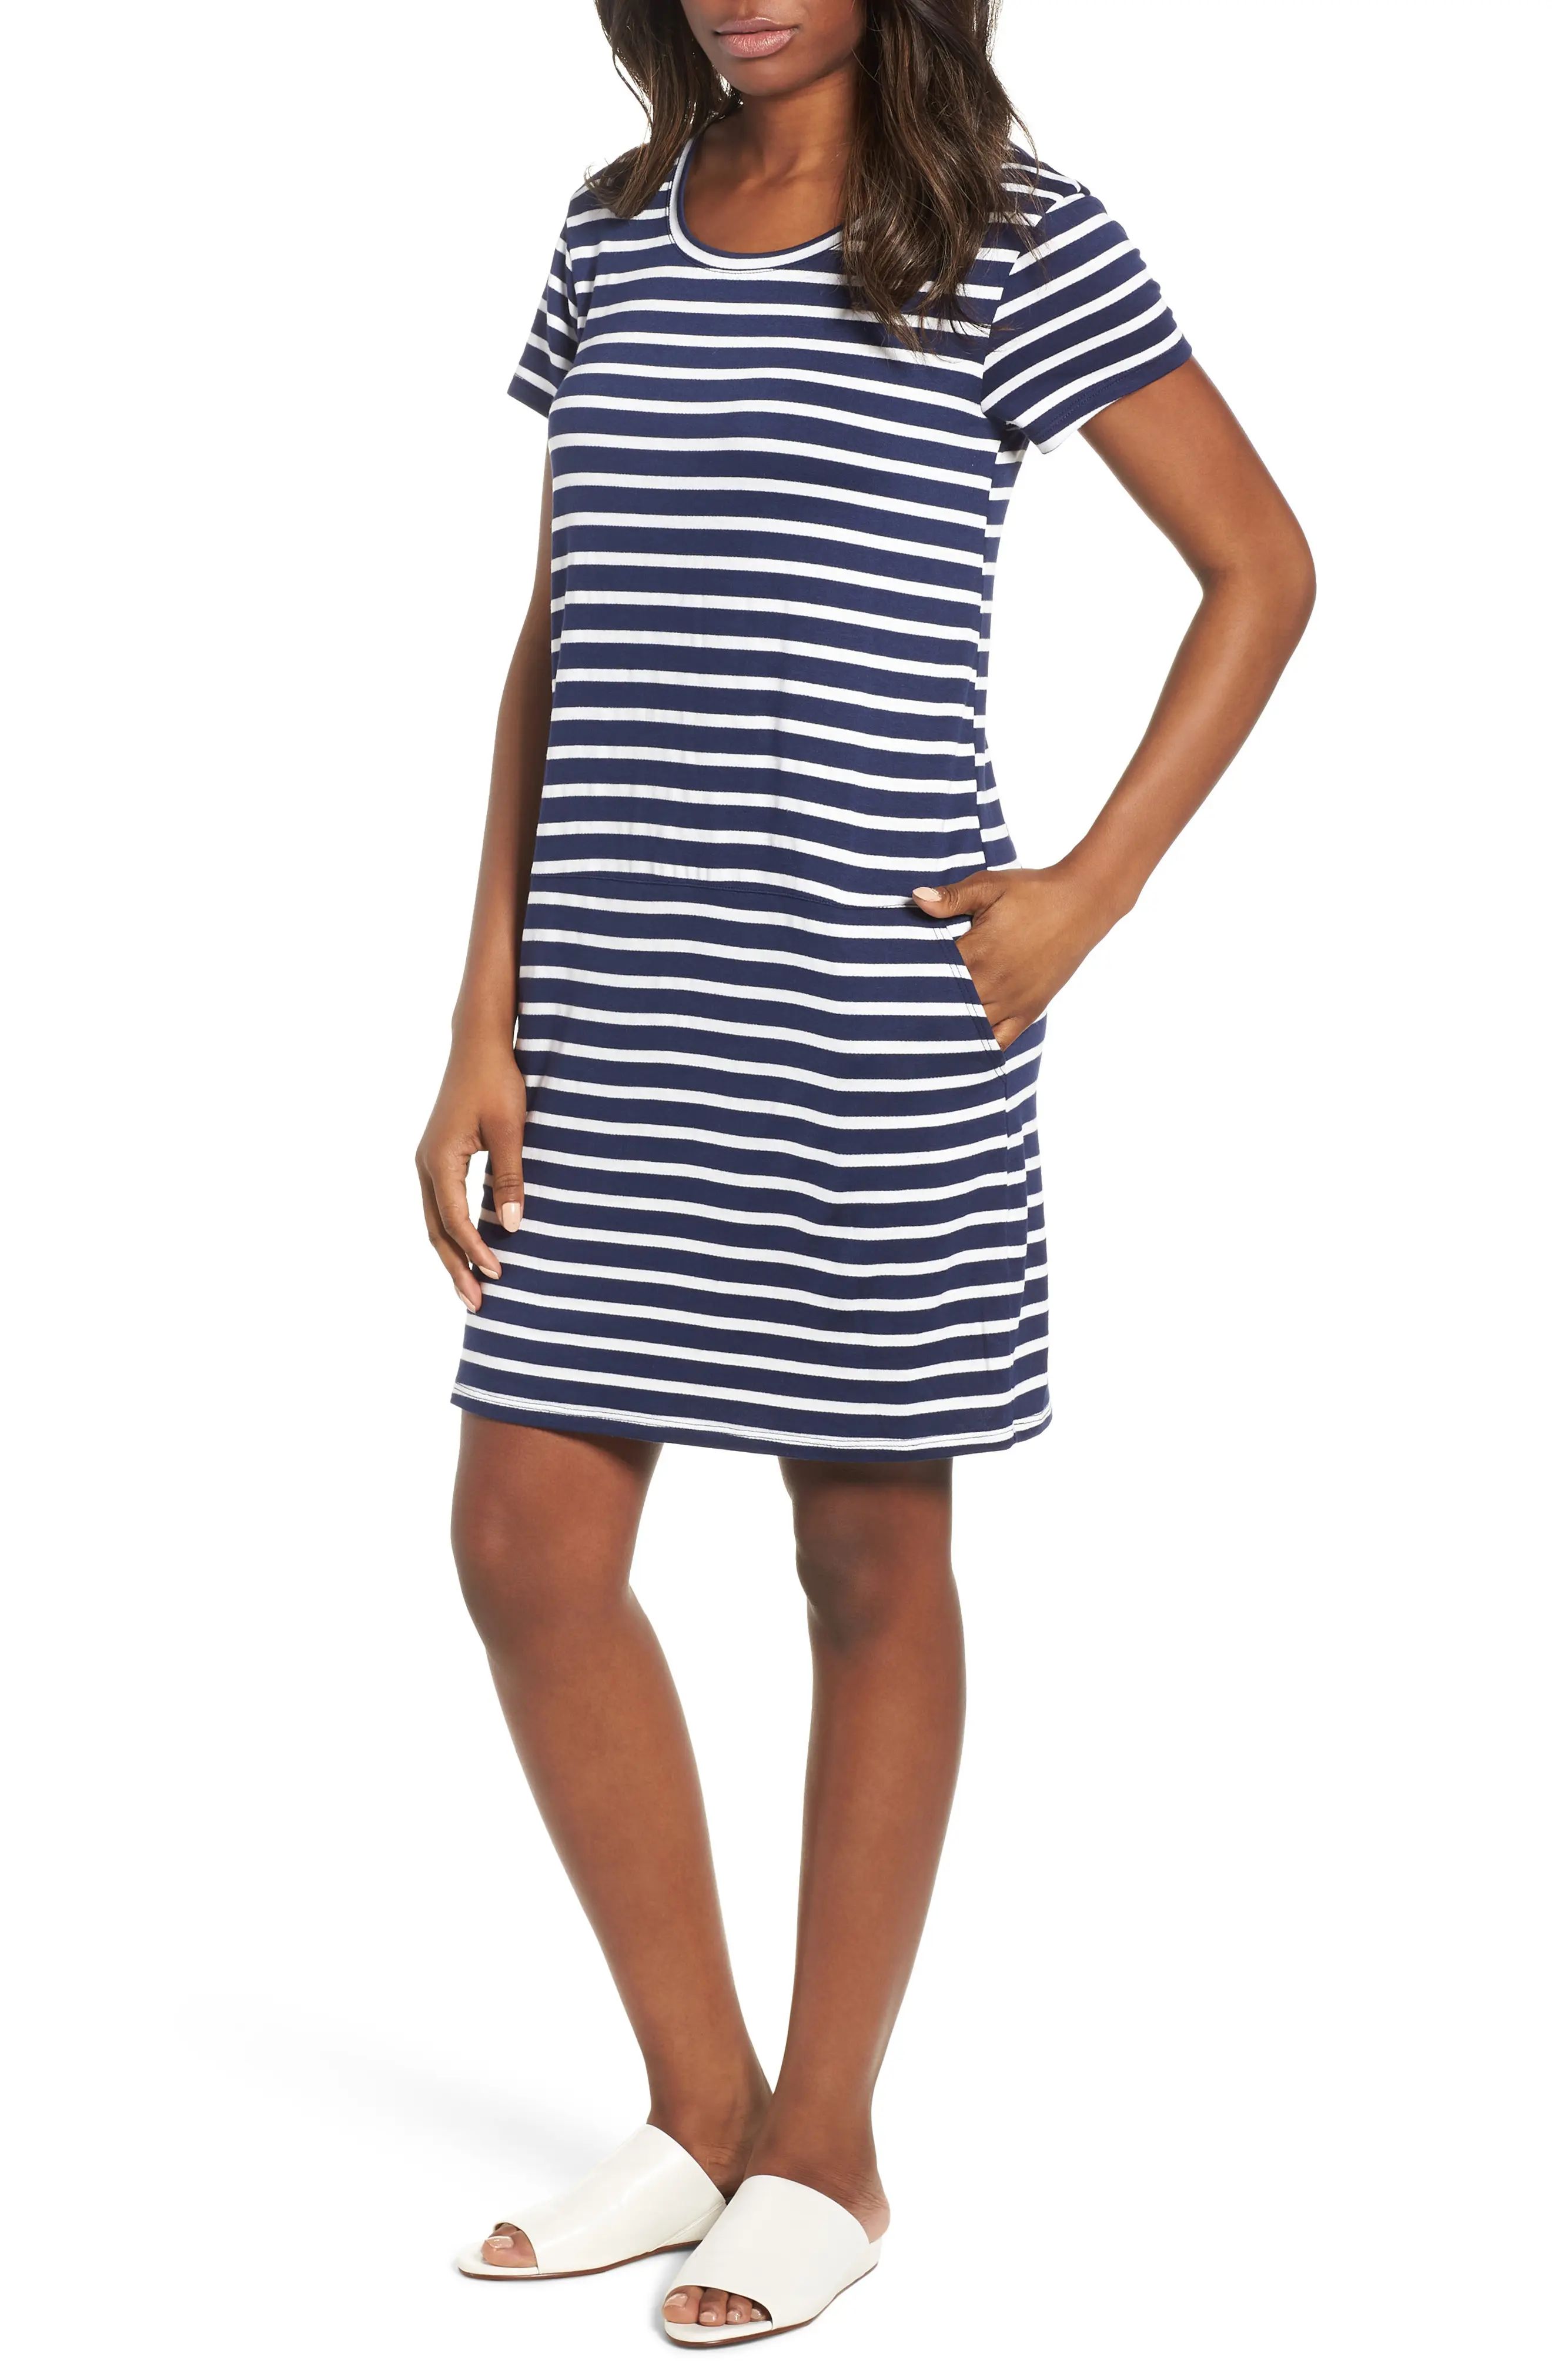 Caslon(R) Knit Shift Dress in Navy- White Constanza Stripe at Nordstrom, Size Small | Nordstrom